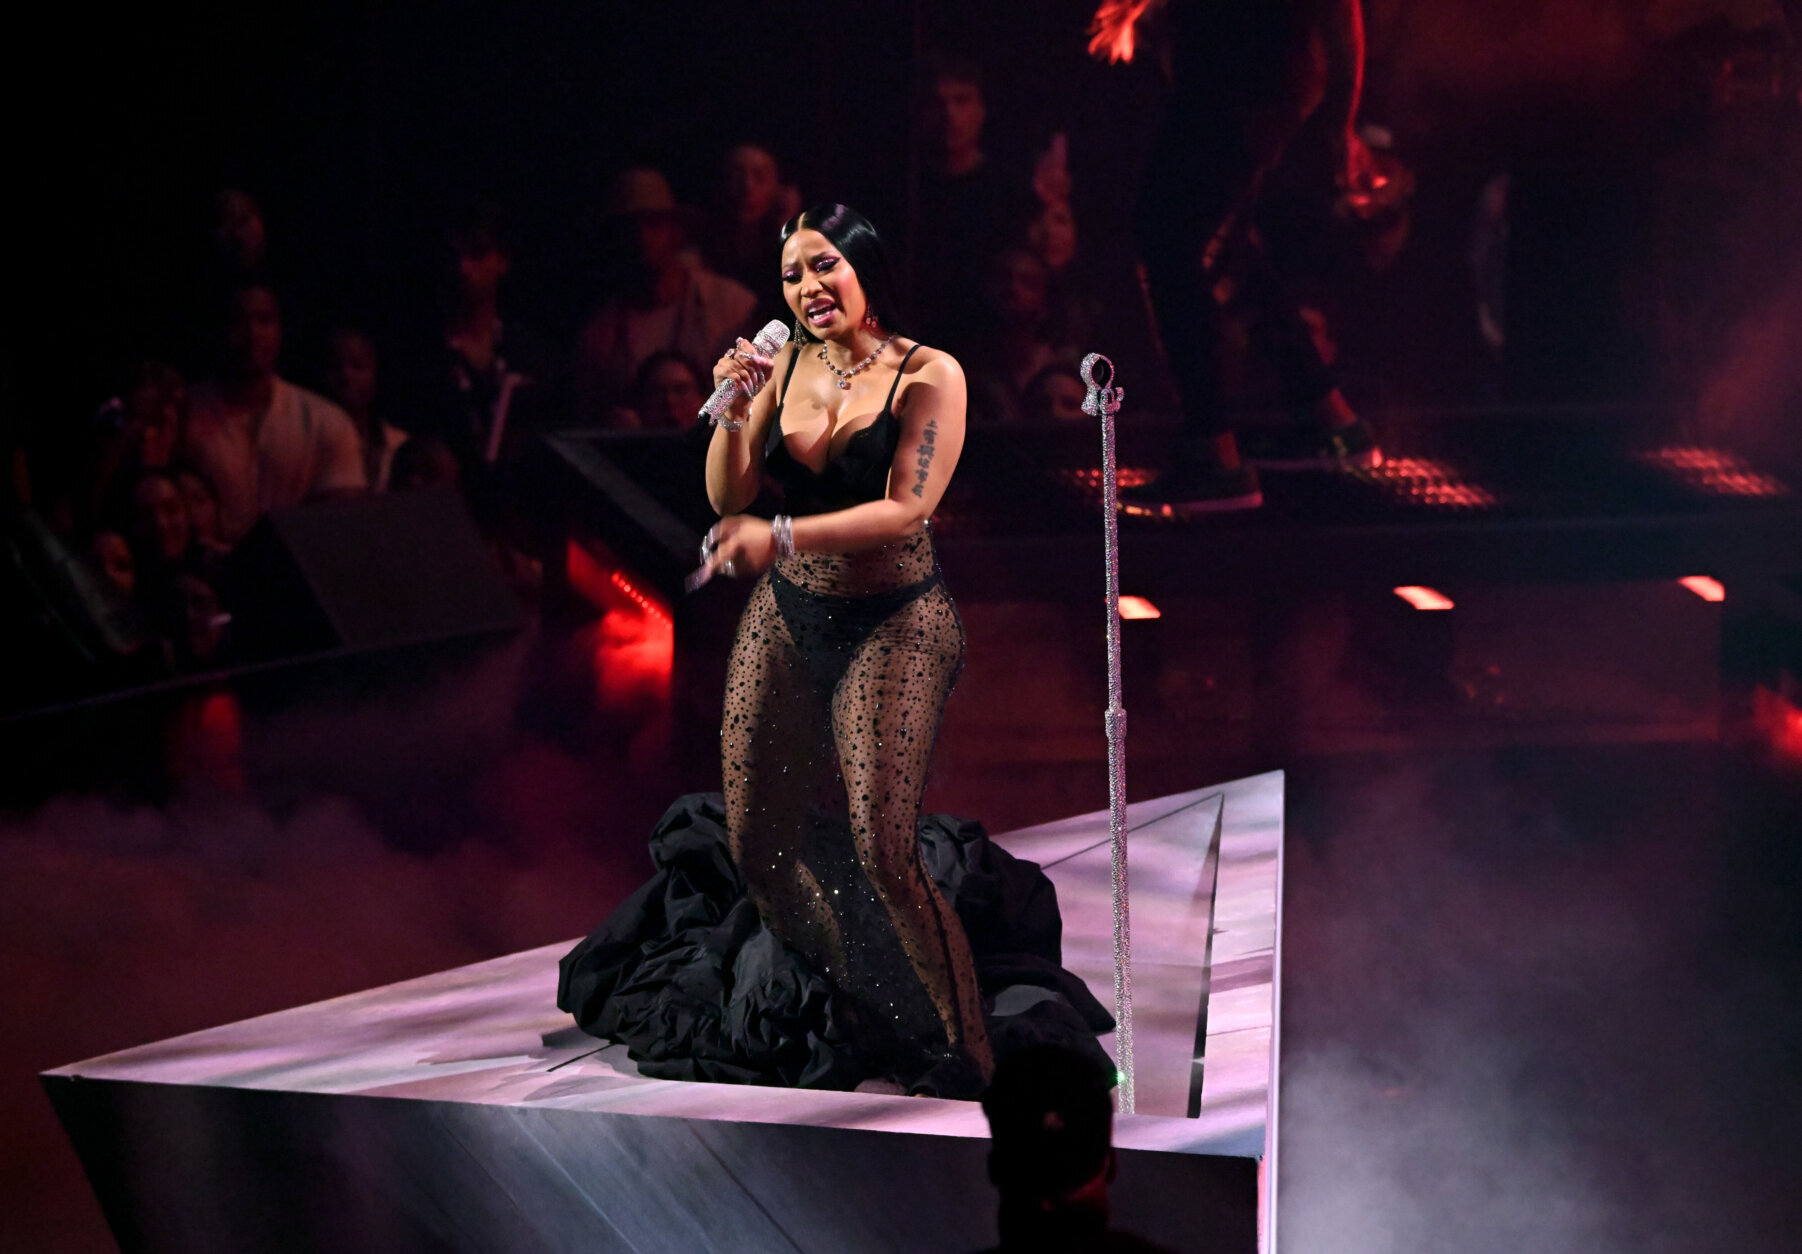 NEWARK, NEW JERSEY - SEPTEMBER 12: Nicki Minaj performs onstage during the 2023 MTV Video Music Awards at Prudential Center on September 12, 2023 in Newark, New Jersey. (Photo by Noam Galai/Getty Images for MTV)